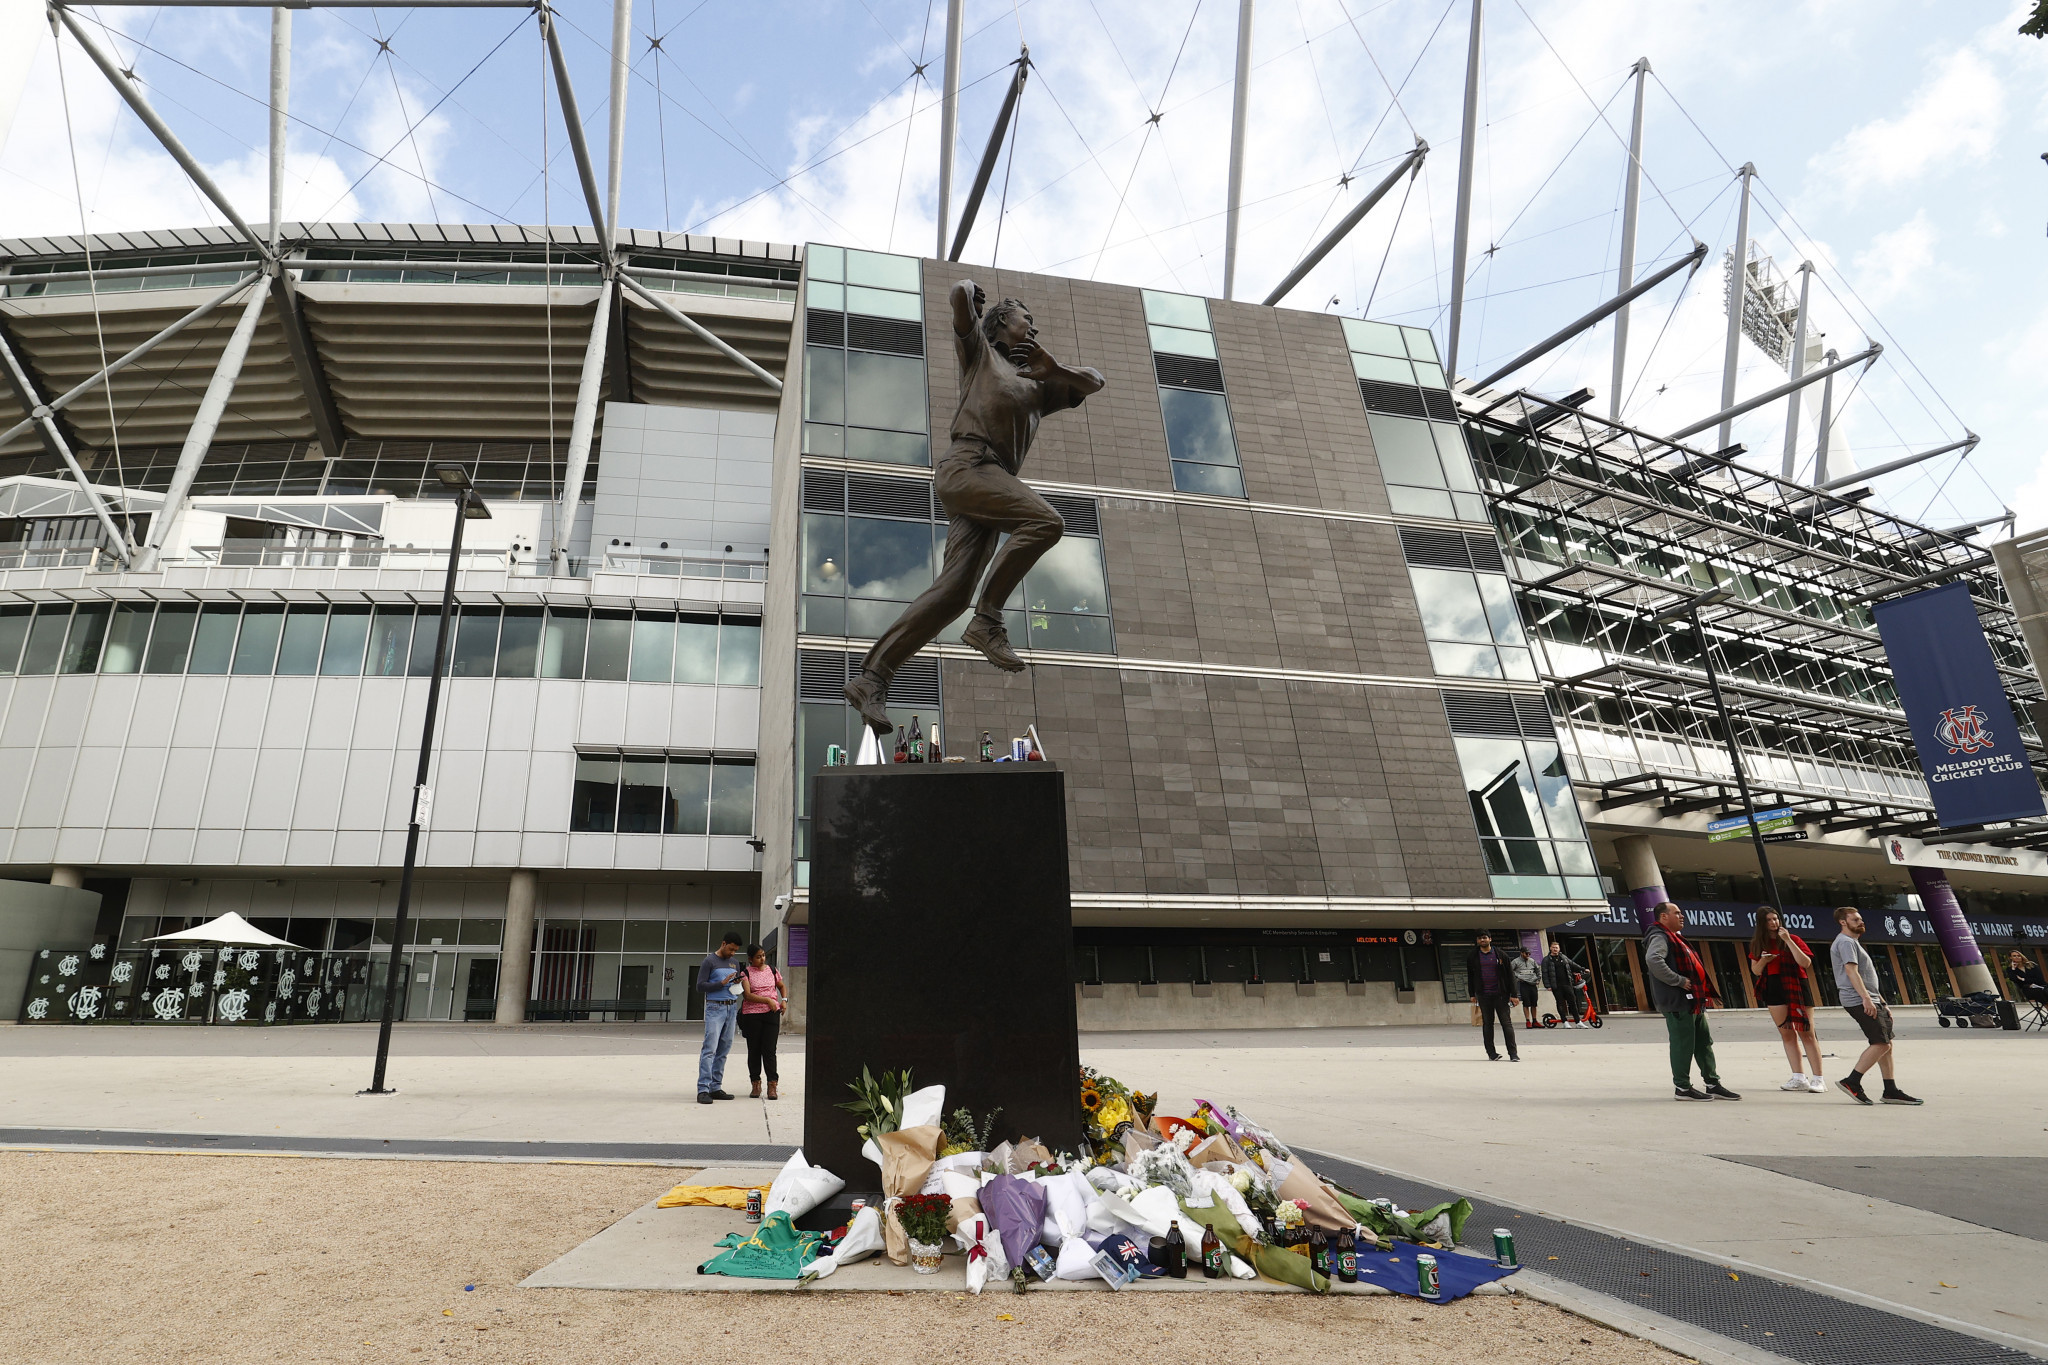 Tributes have been left beside Shane Warne's statue at the Melbourne Cricket Ground following his death at the age of 52 ©Getty Images